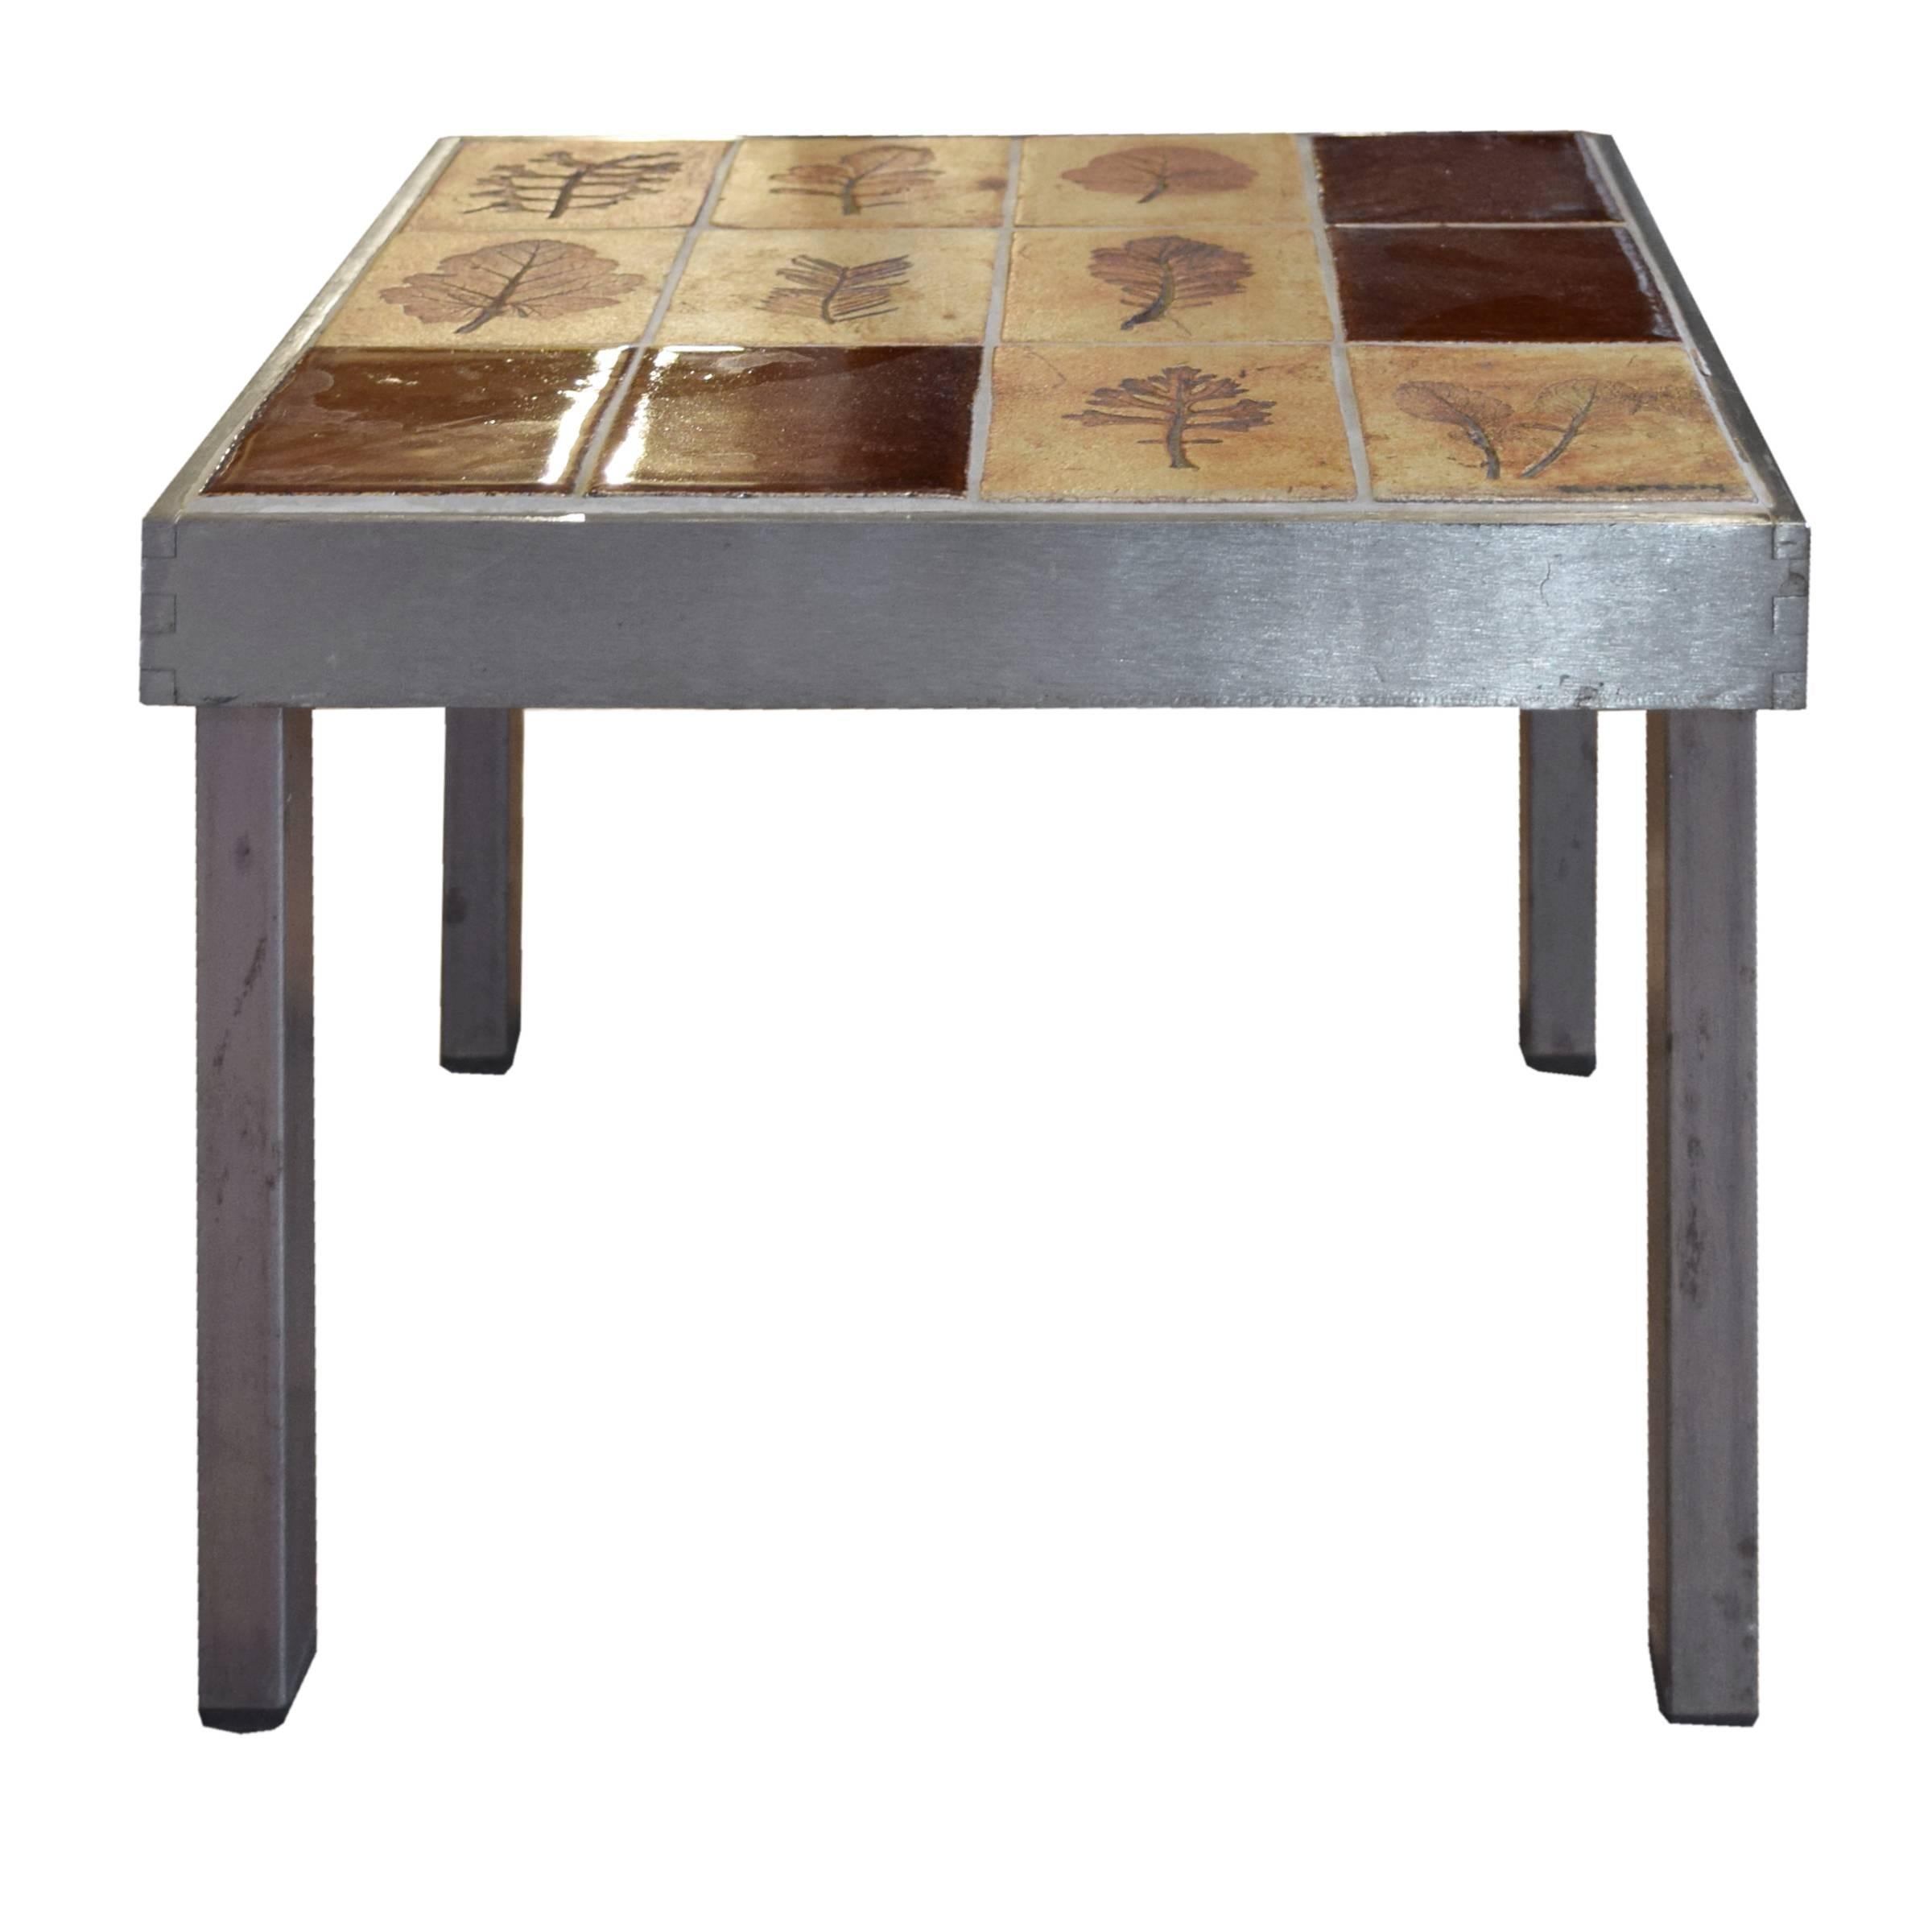 A great pair of low French tables with steel bases and tile tops with lovely leaf imprints, signed 'R. Capron'. Roger Capron (1922-2006) was an accomplished French ceramist winning many awards in his career including Gold Medal at the Brussels